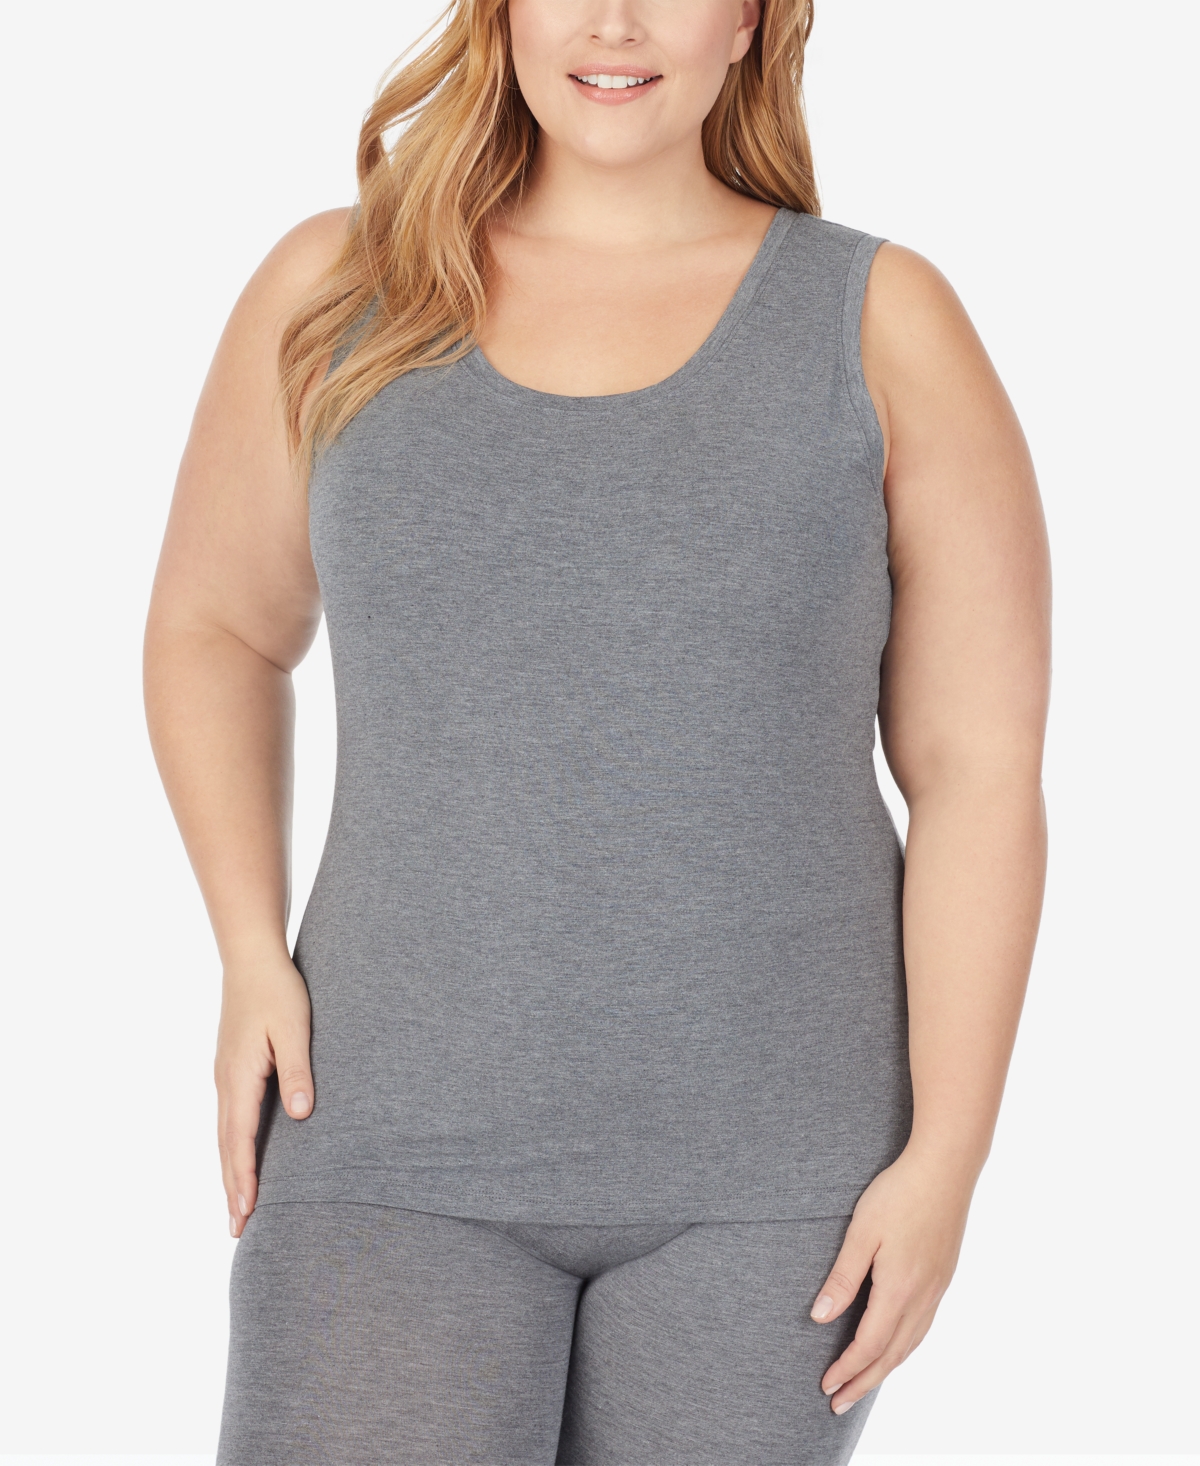 Plus Size Softwear with Stretch Reversible Tank Top - Charcoal